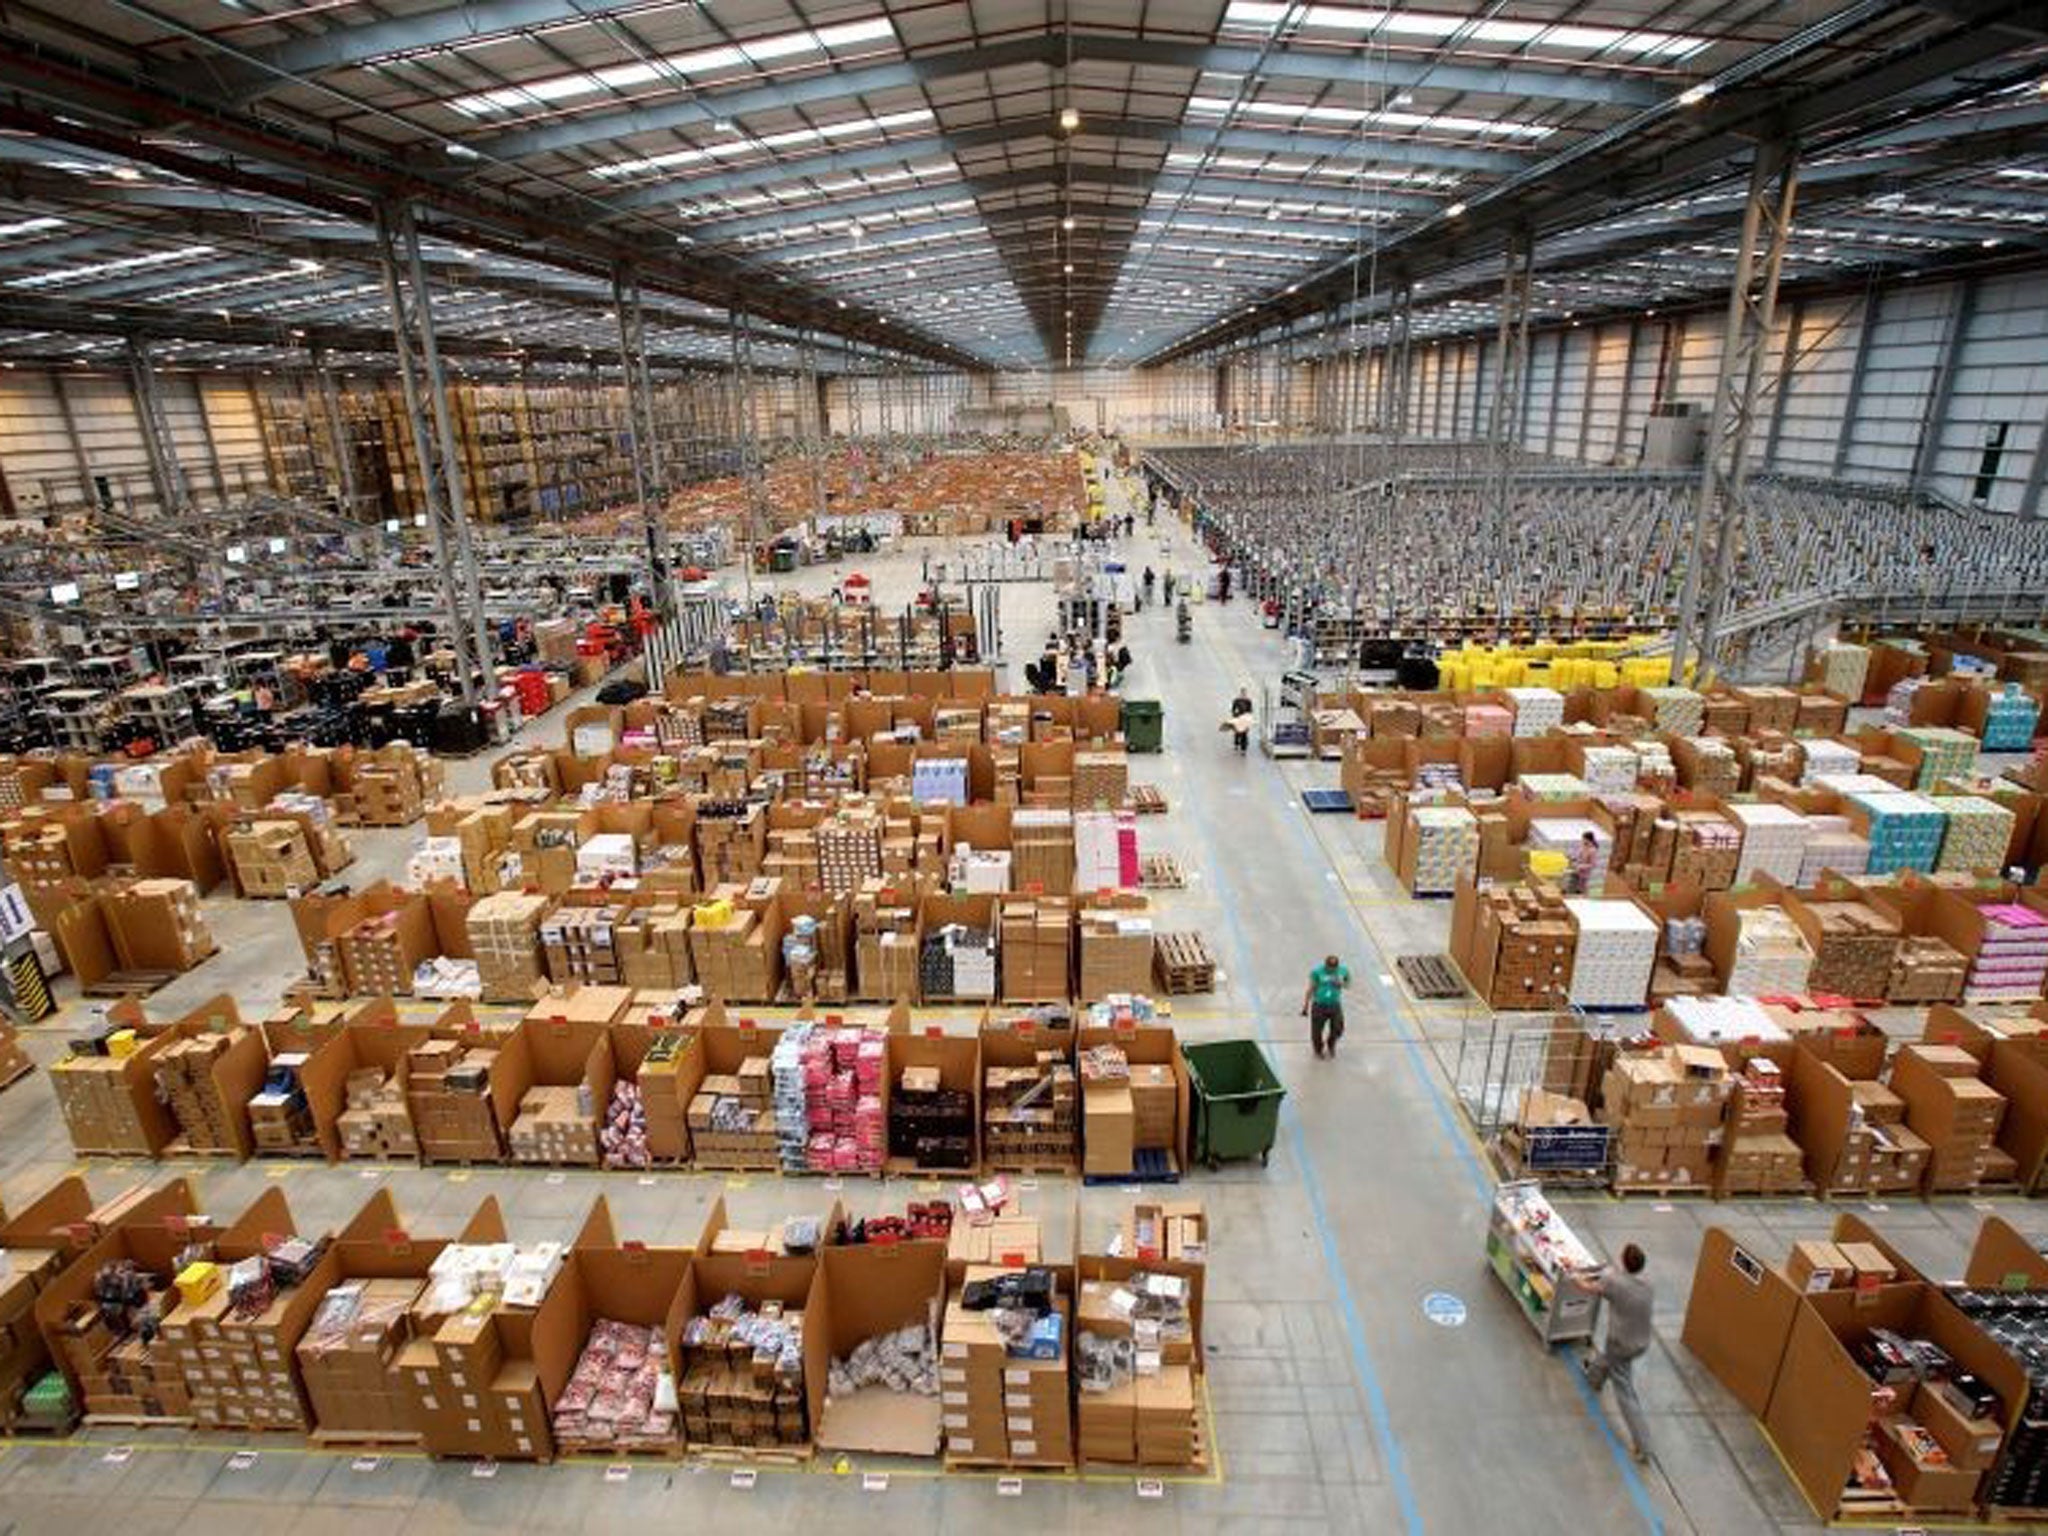 The Amazon fulfillment centre in Peterborough, Cambridgeshire. Online retailers are expecting their busiest day of the year as pre-Christmas shoppers take part in Cyber Monday